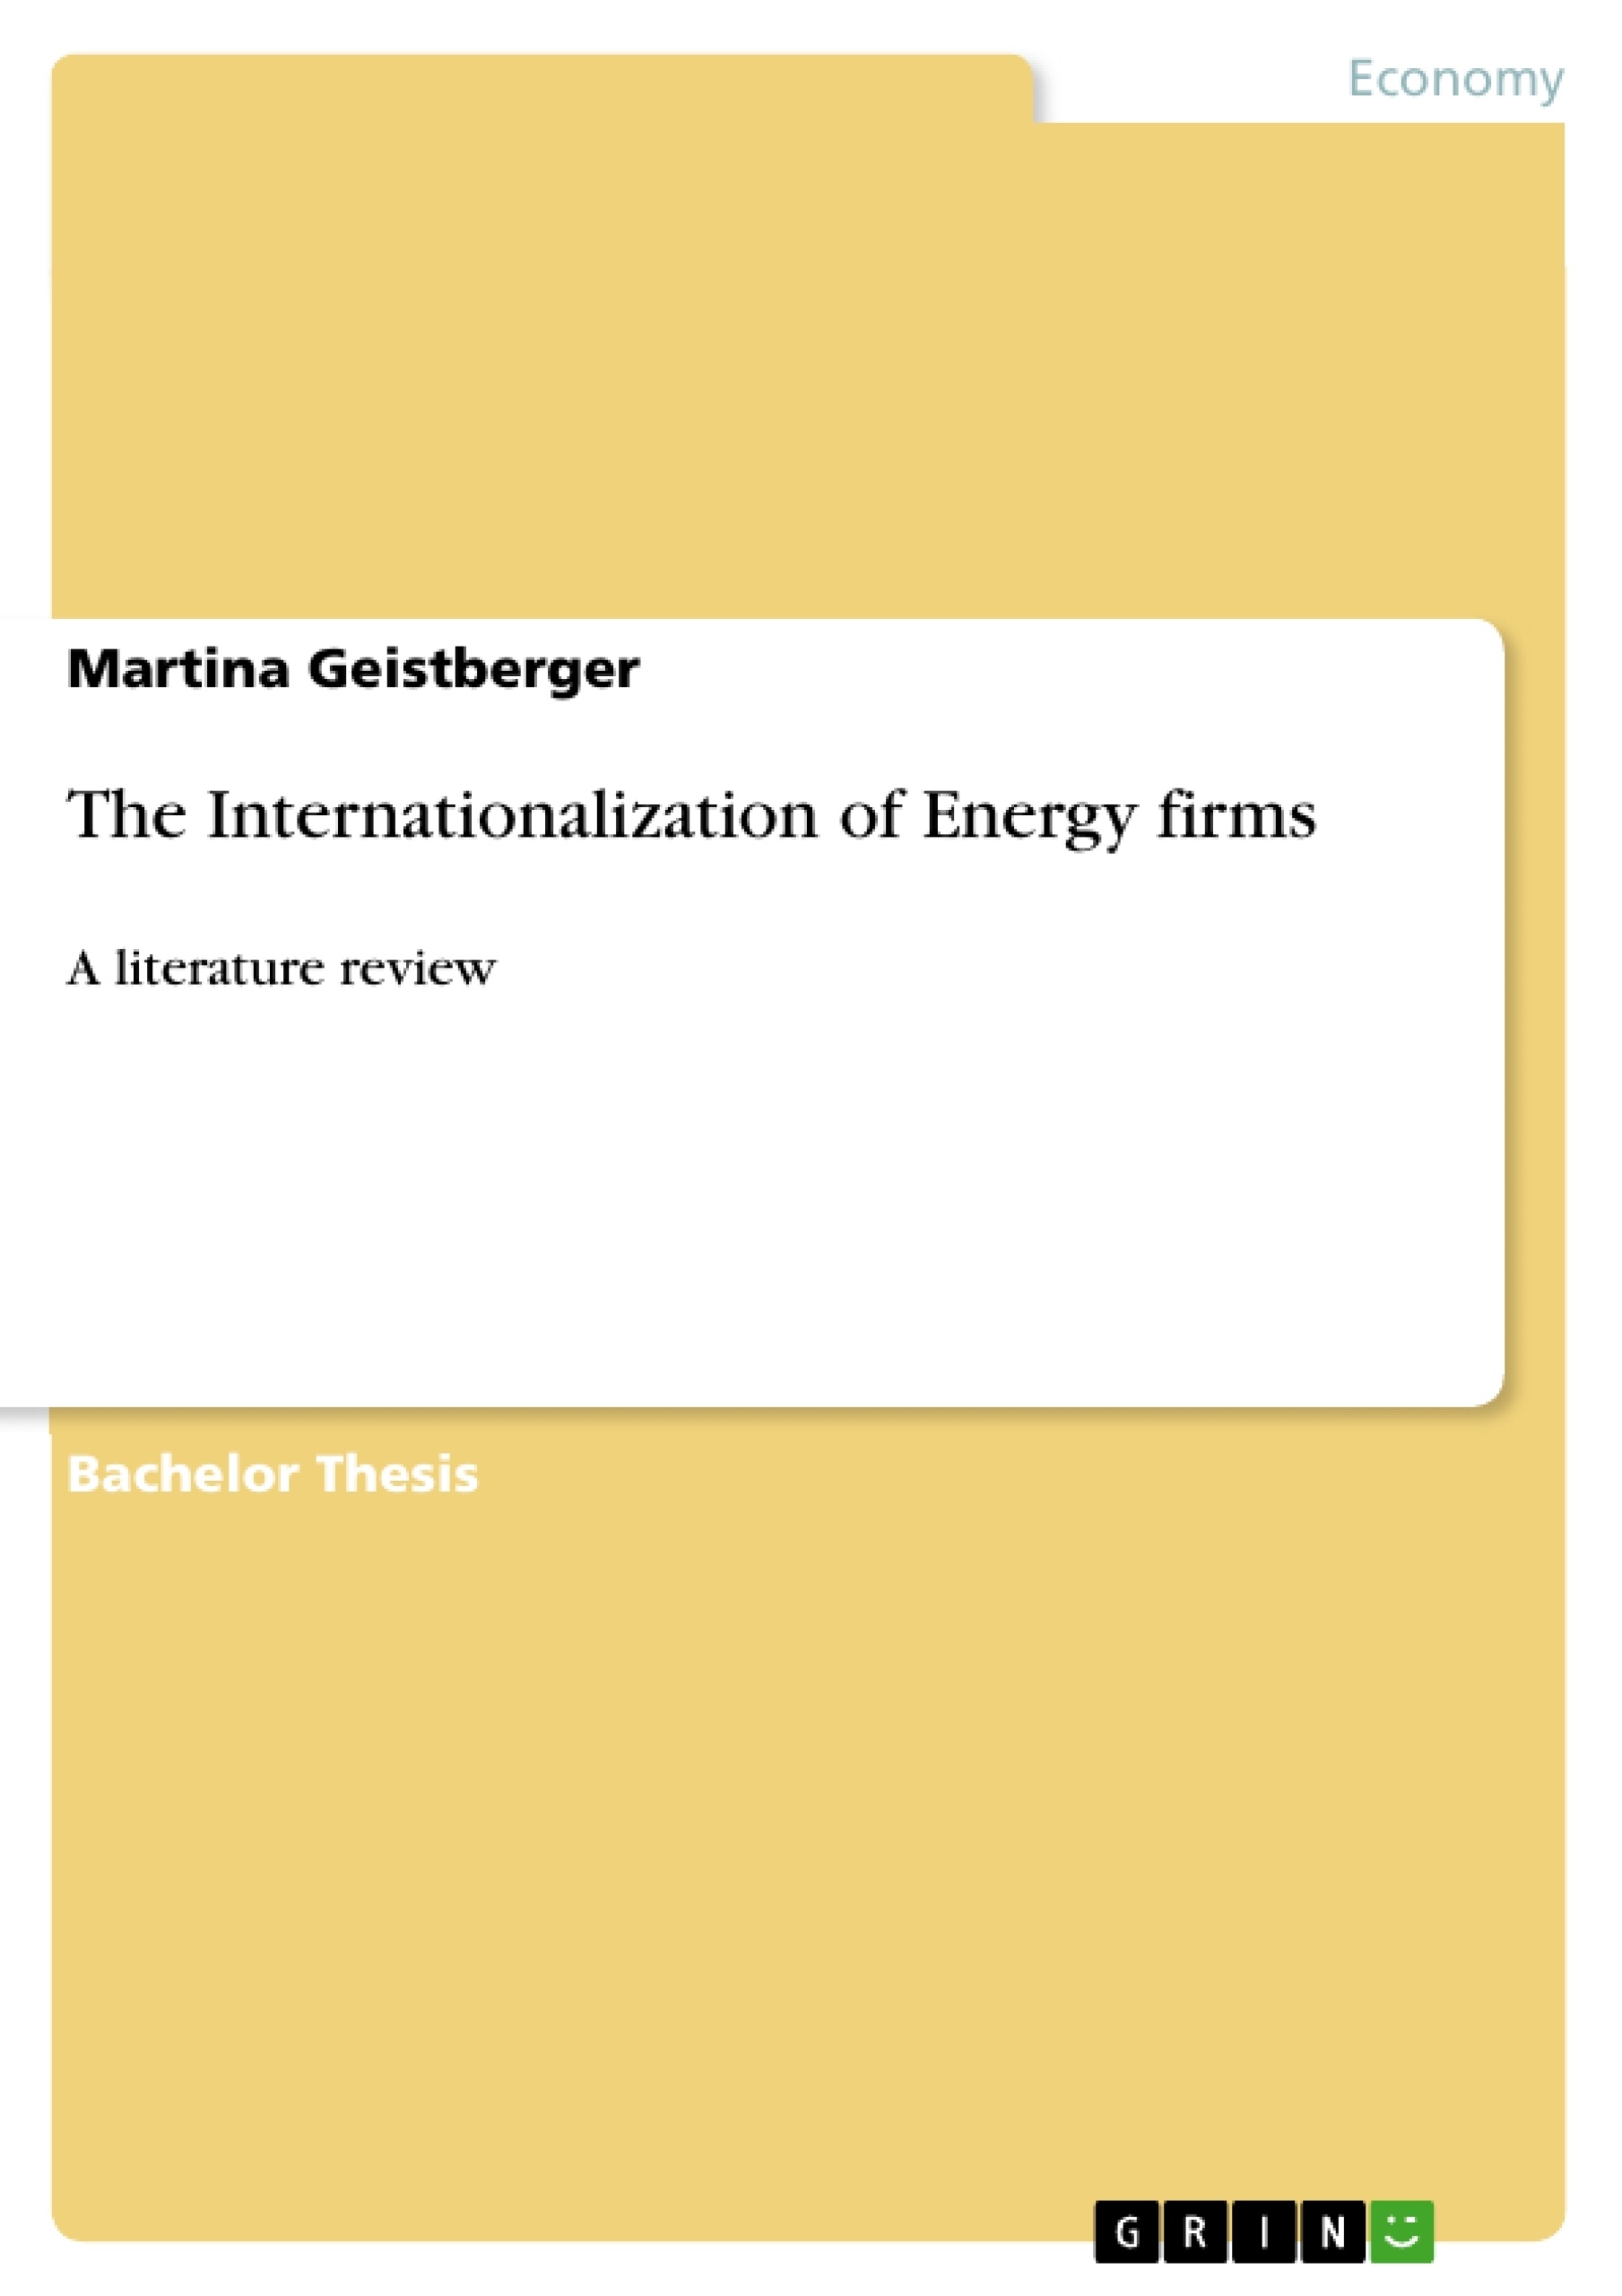 Título: The Internationalization of Energy firms